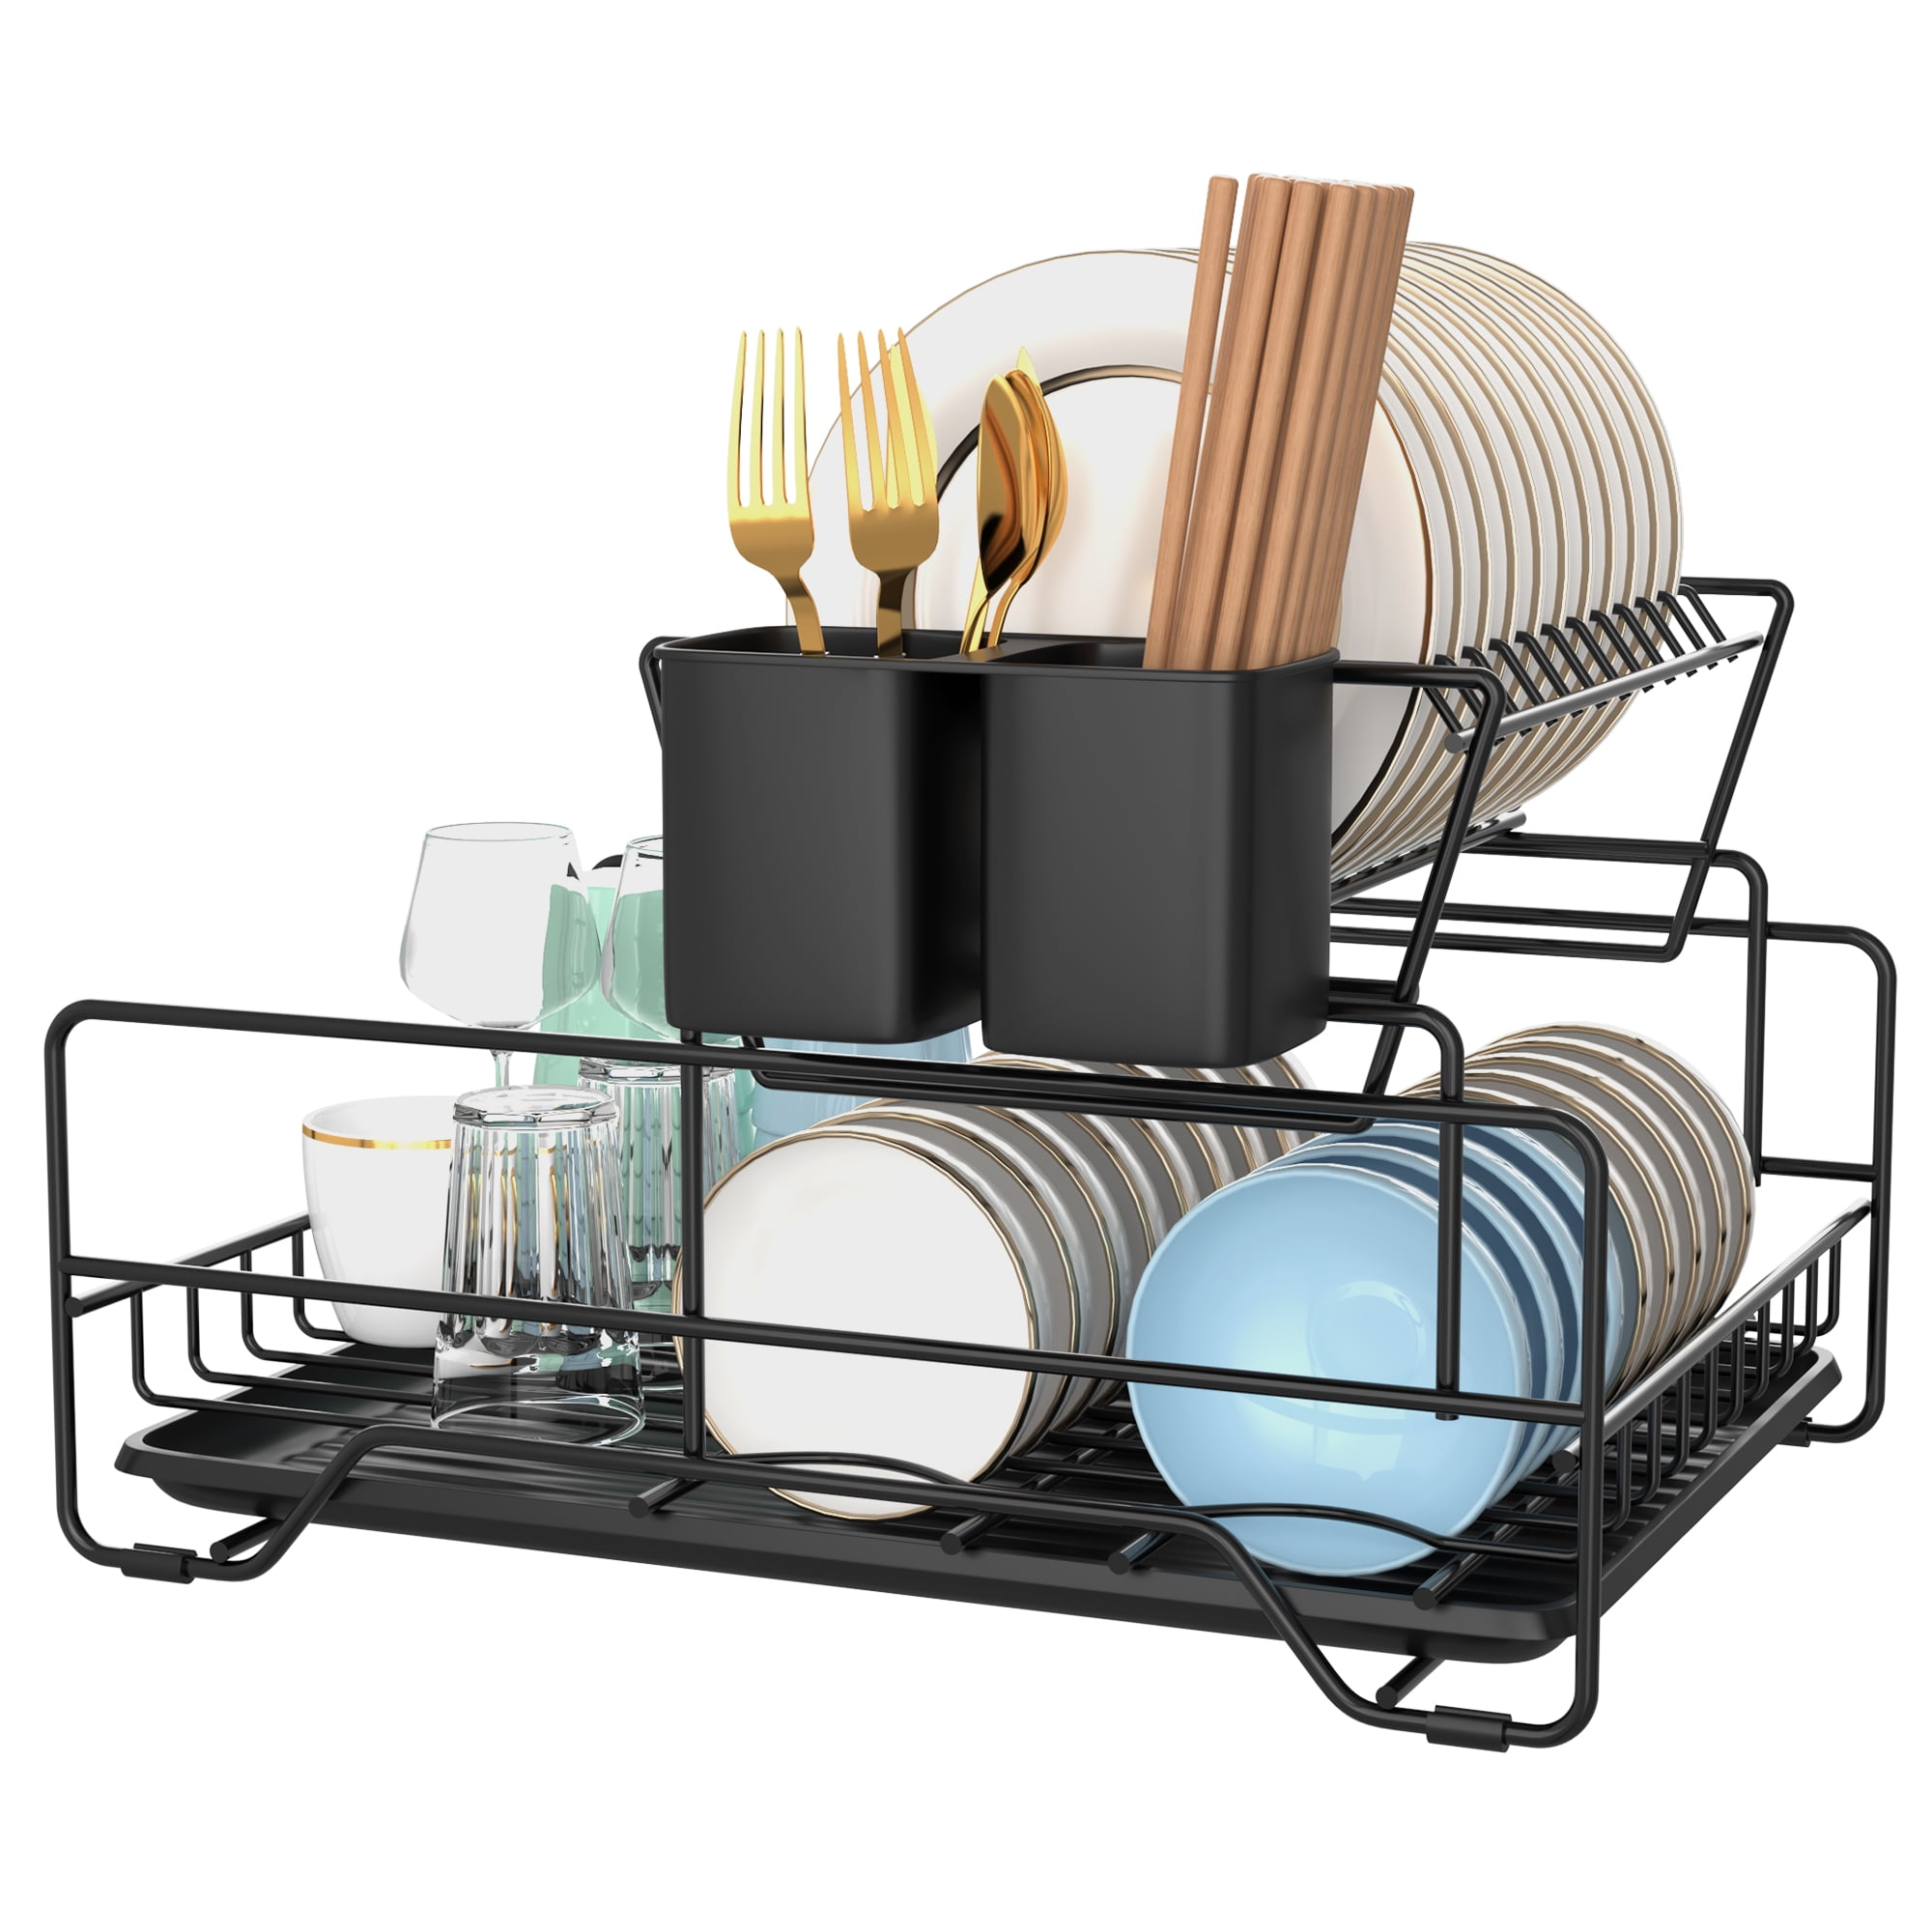 Dropship 2 Tier Dish Drying Rack Drainer Stainless Steel Kitchen